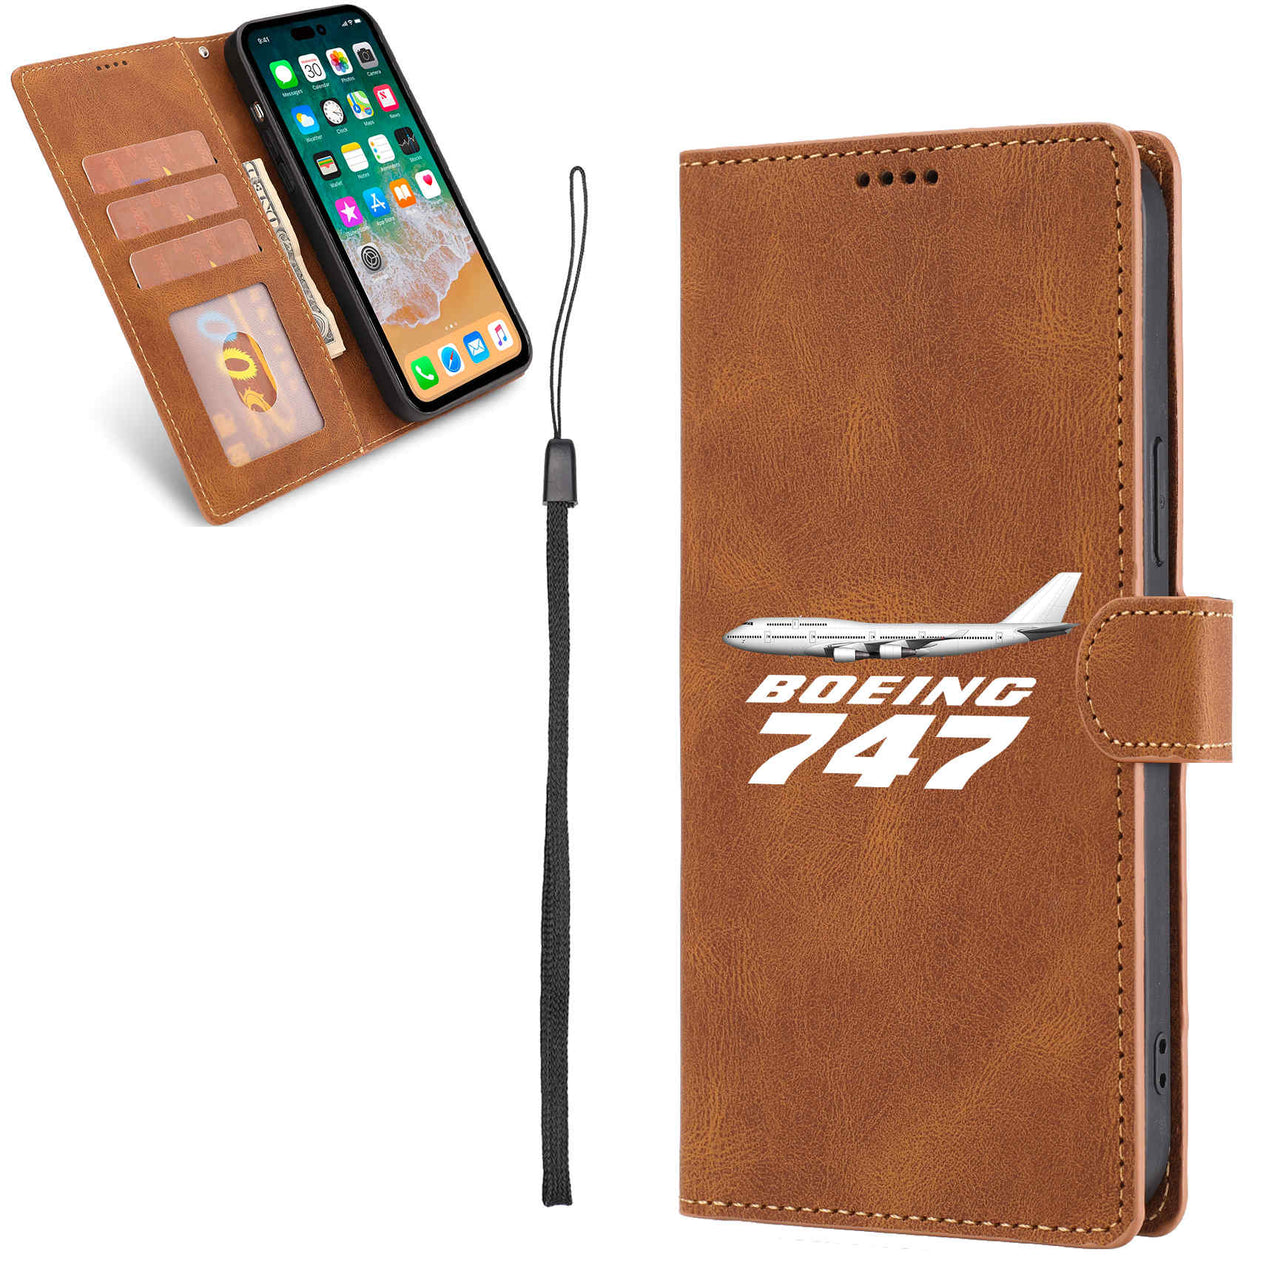 The Boeing 747 Designed Leather Samsung S & Note Cases